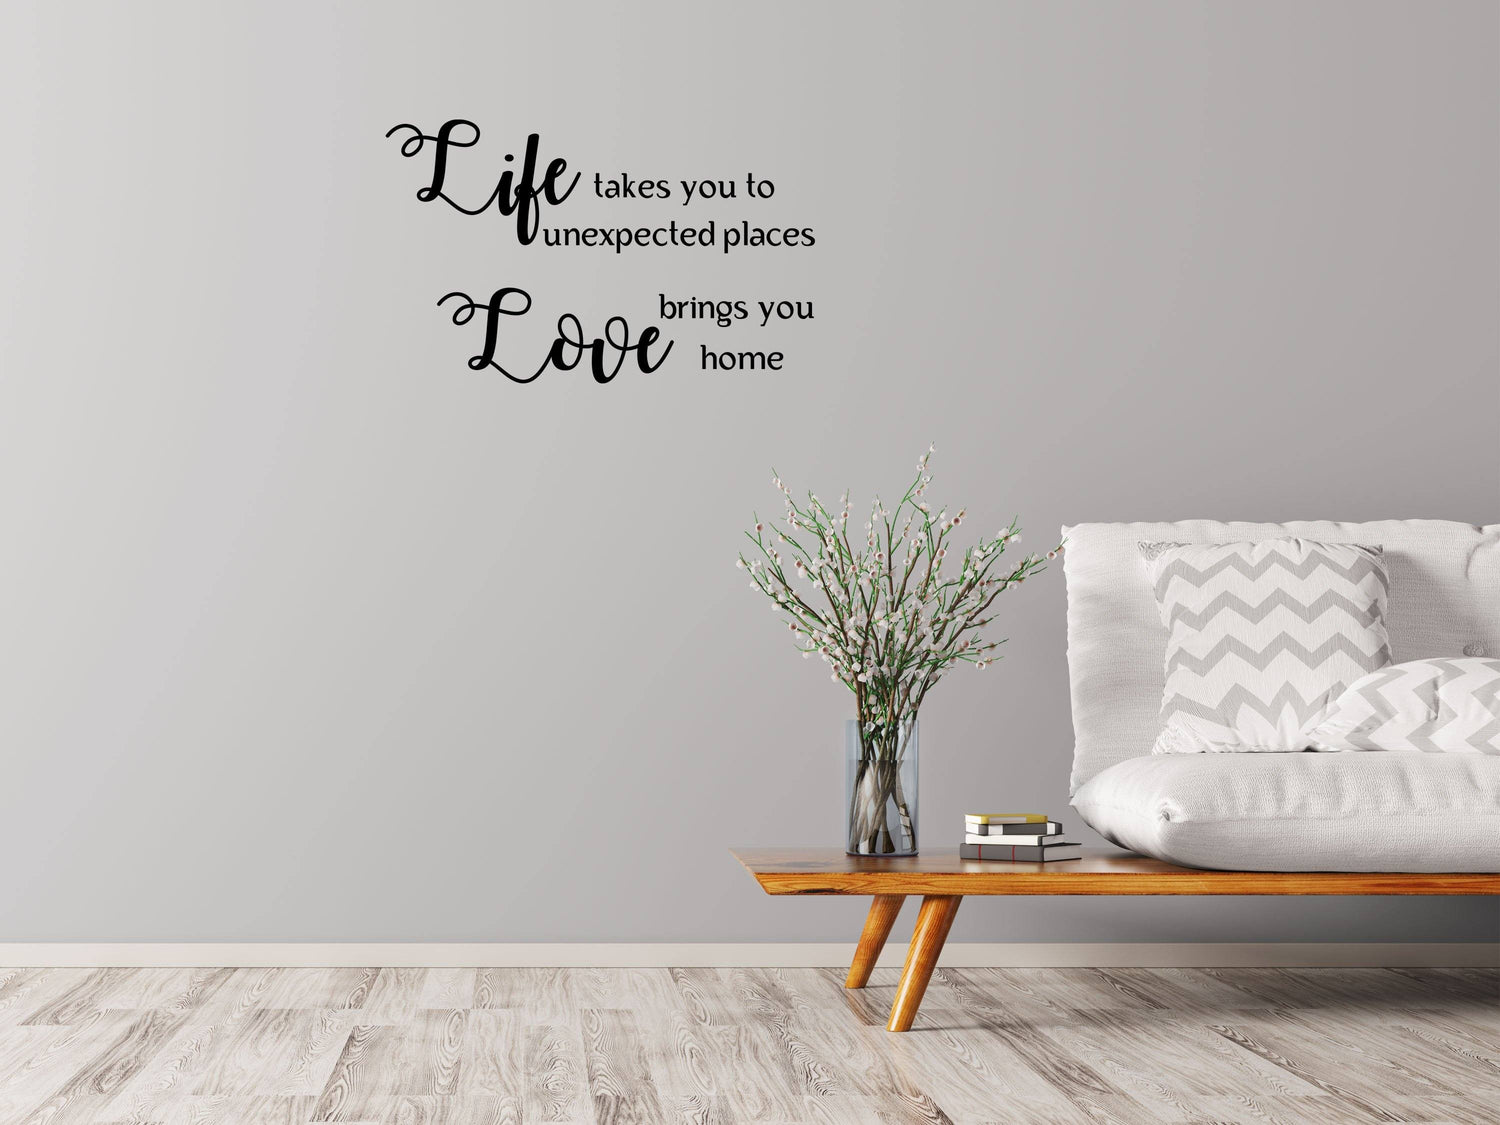 Life Takes You Unexpected Places Decal - Life Quote Decal - Life and Love Decal - Love Brings You Home - Inspirational Wall Art Vinyl Wall Decal Done 